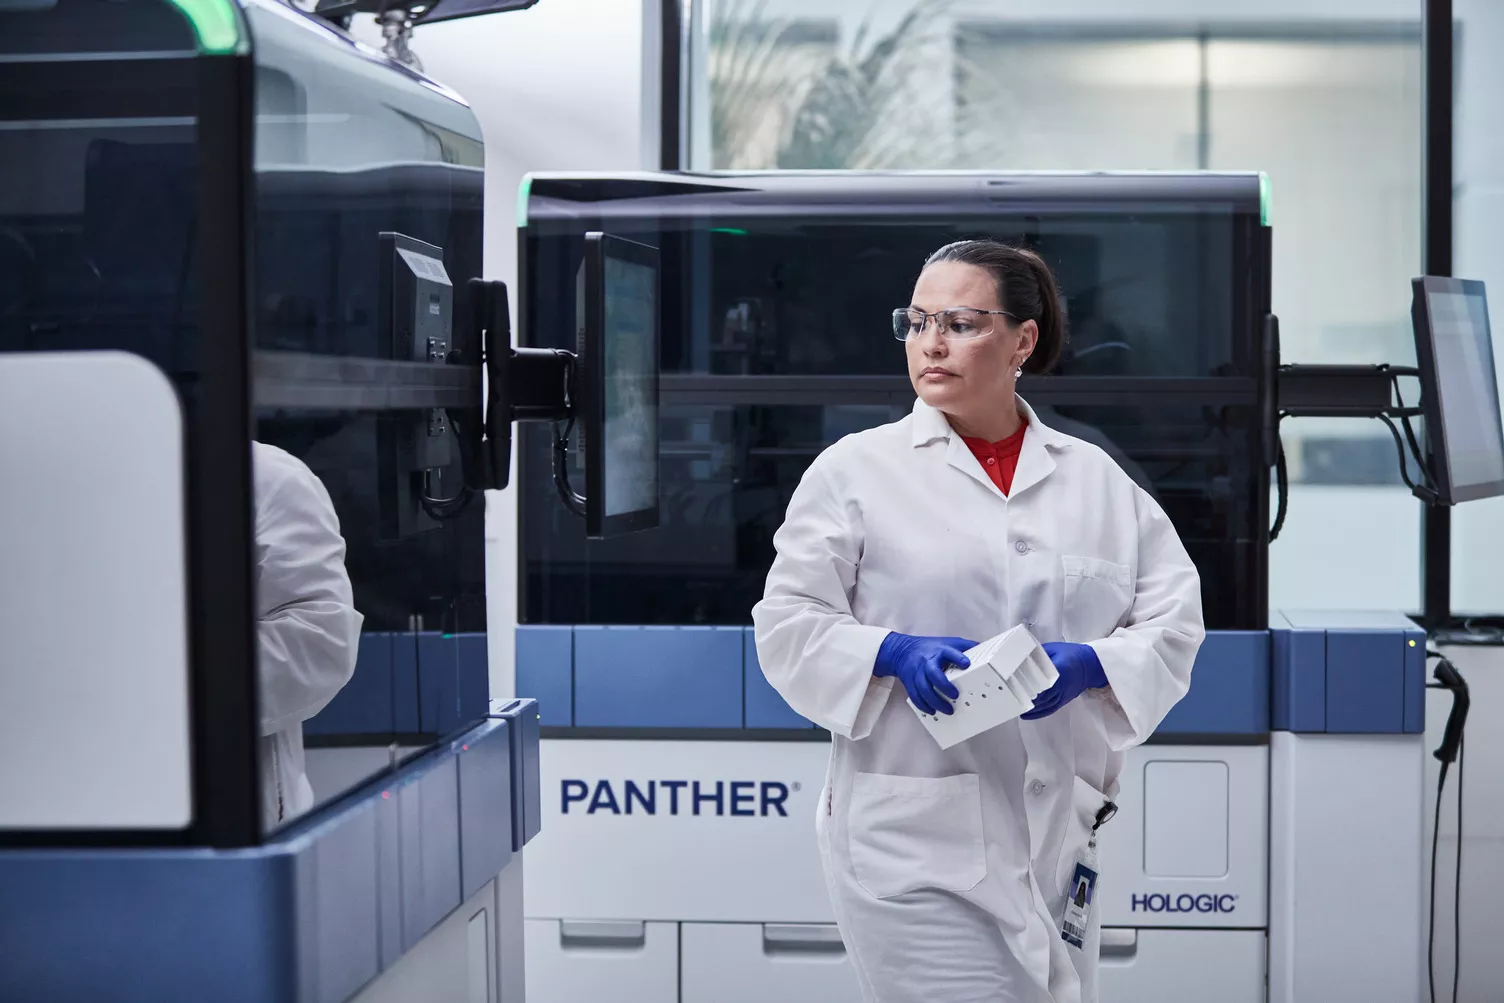 Technician walking by Panther Systems in a lab setting